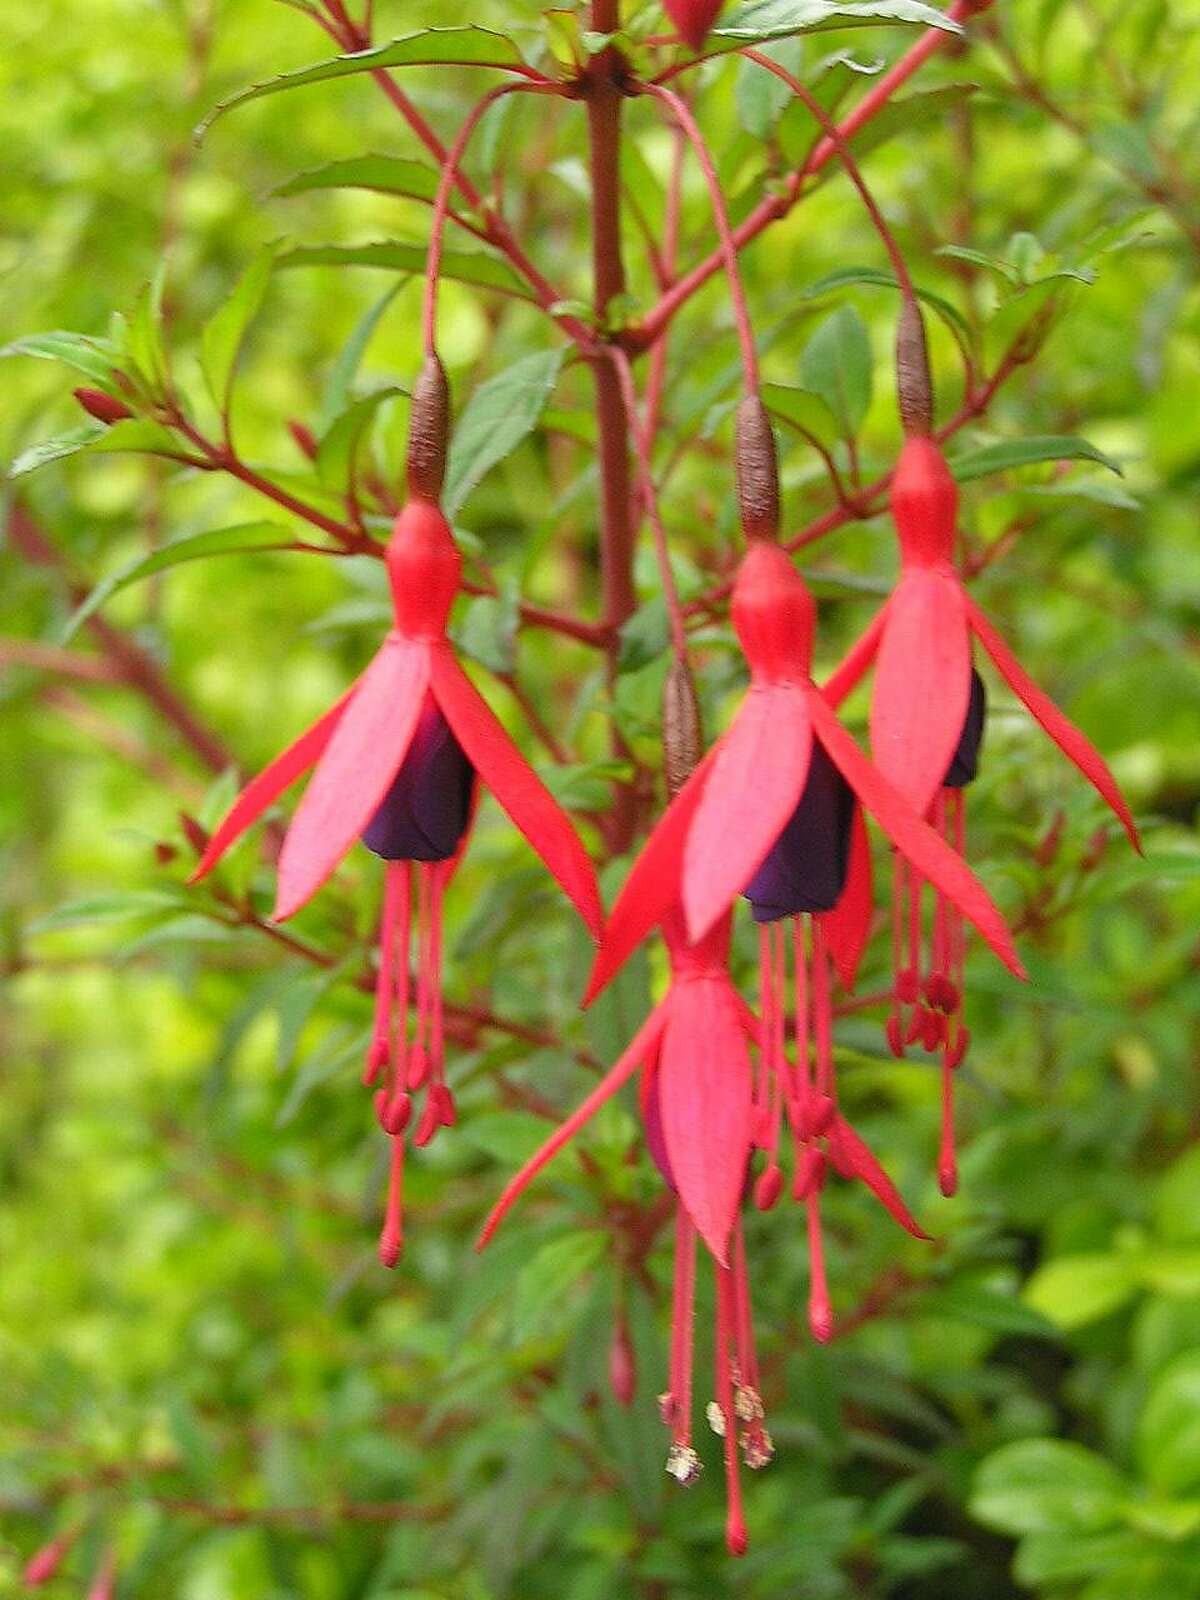 Fuschia 'Campo Thilco.' The flower of Fuschia 'Cardinal' is nearly twice as long as that of F. 'Campo Thilco.' Credit: Peter Baye Ran on: 08-30-2006 The flowers of fuchsia 'Cardinal,' left, are almost twice as long as those of 'Campo Thilco,' above. In other words, the tube of 'Cardinal' is as long as the whole flower of 'Campo Thilco.' Ran on: 08-30-2006 Ran on: 08-30-2006 Ran on: 08-30-2006